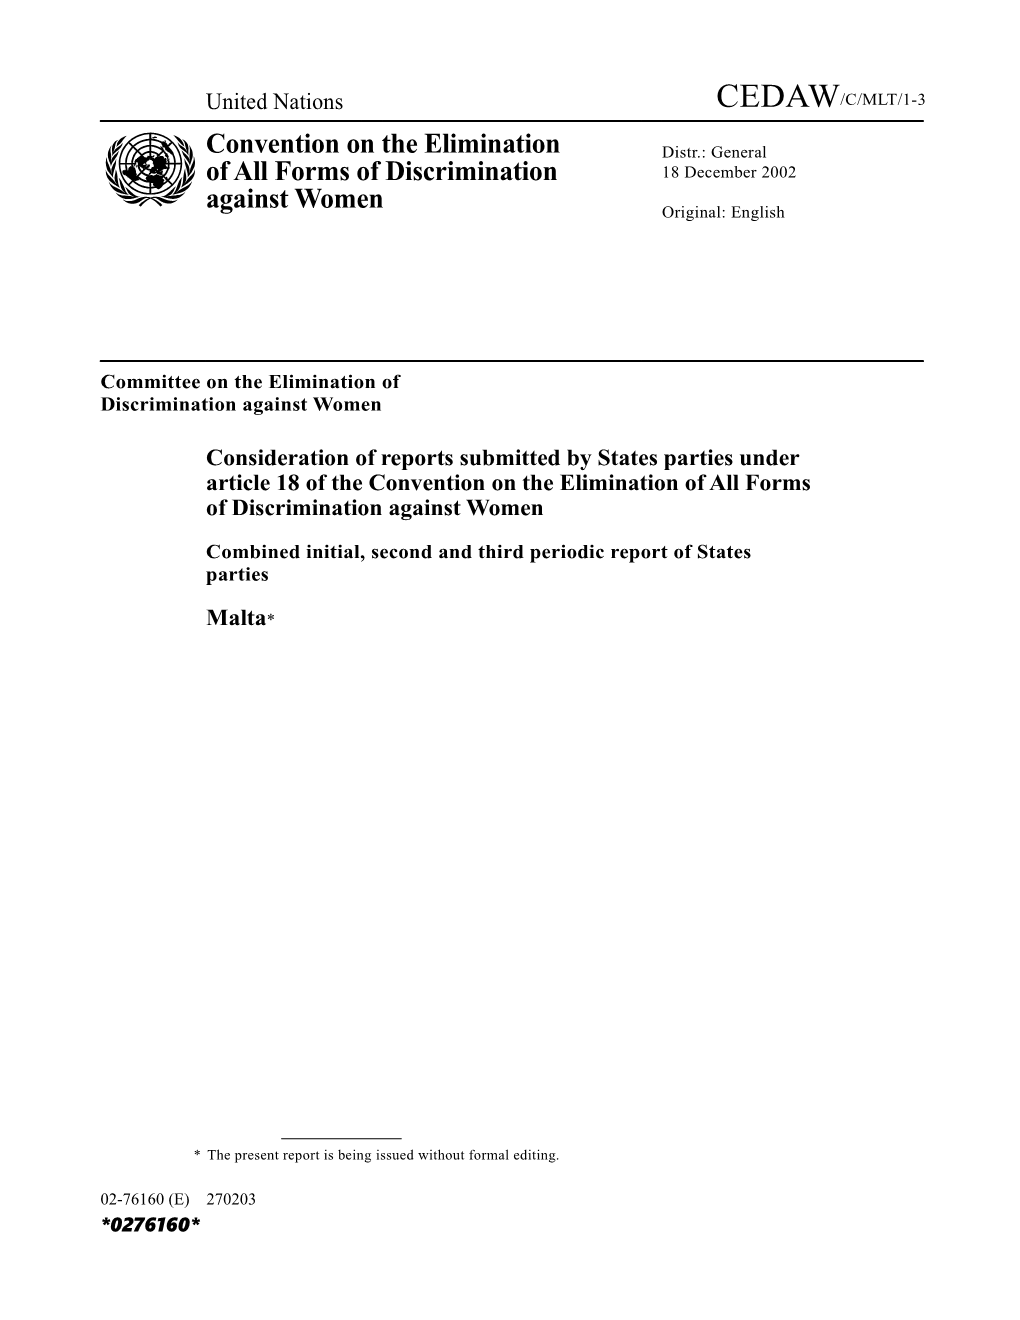 Combined Initial, Second and Third Periodic Report of States Parties